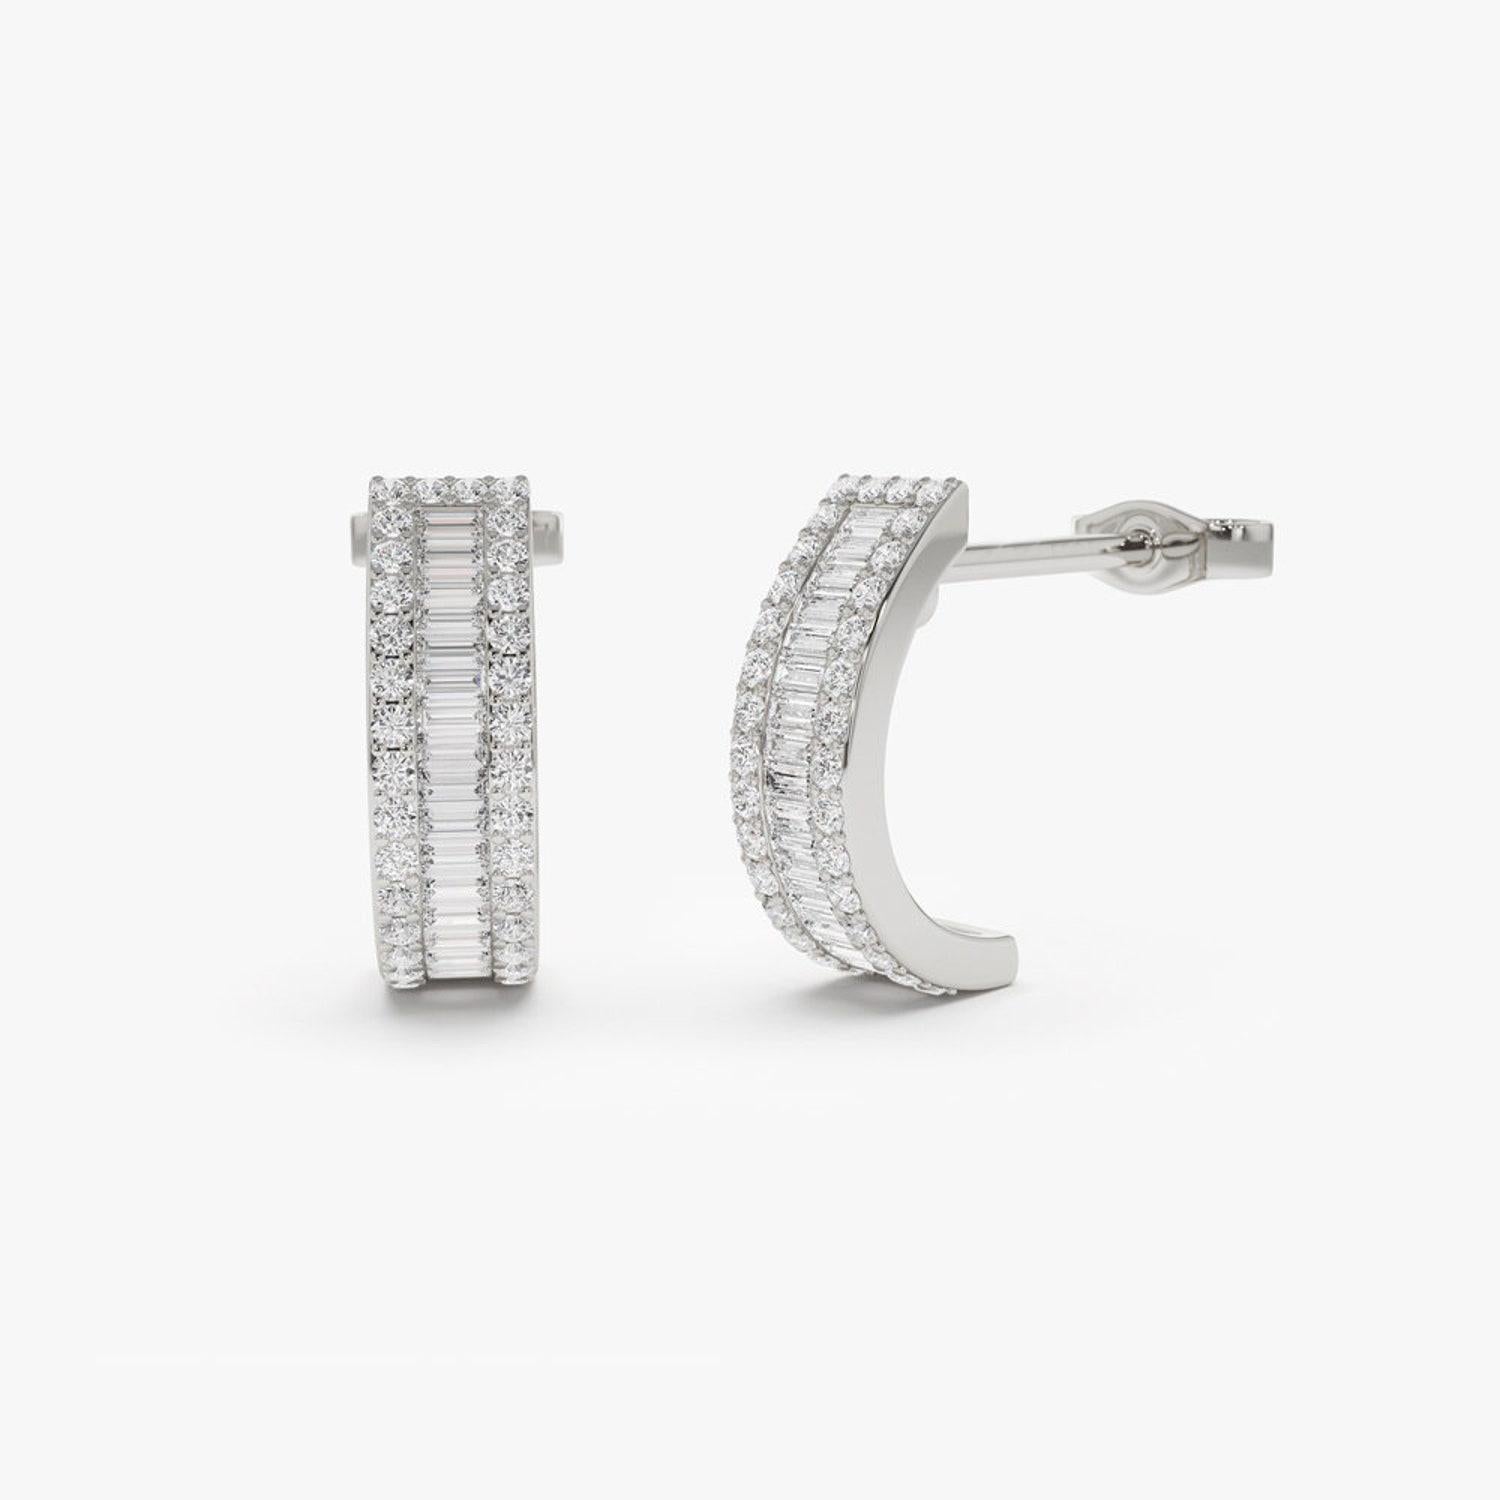 Brilliant Cut Diamond Earrings / 14k Gold Baguette and Round Diamond Micro Pave Earrings For Sale